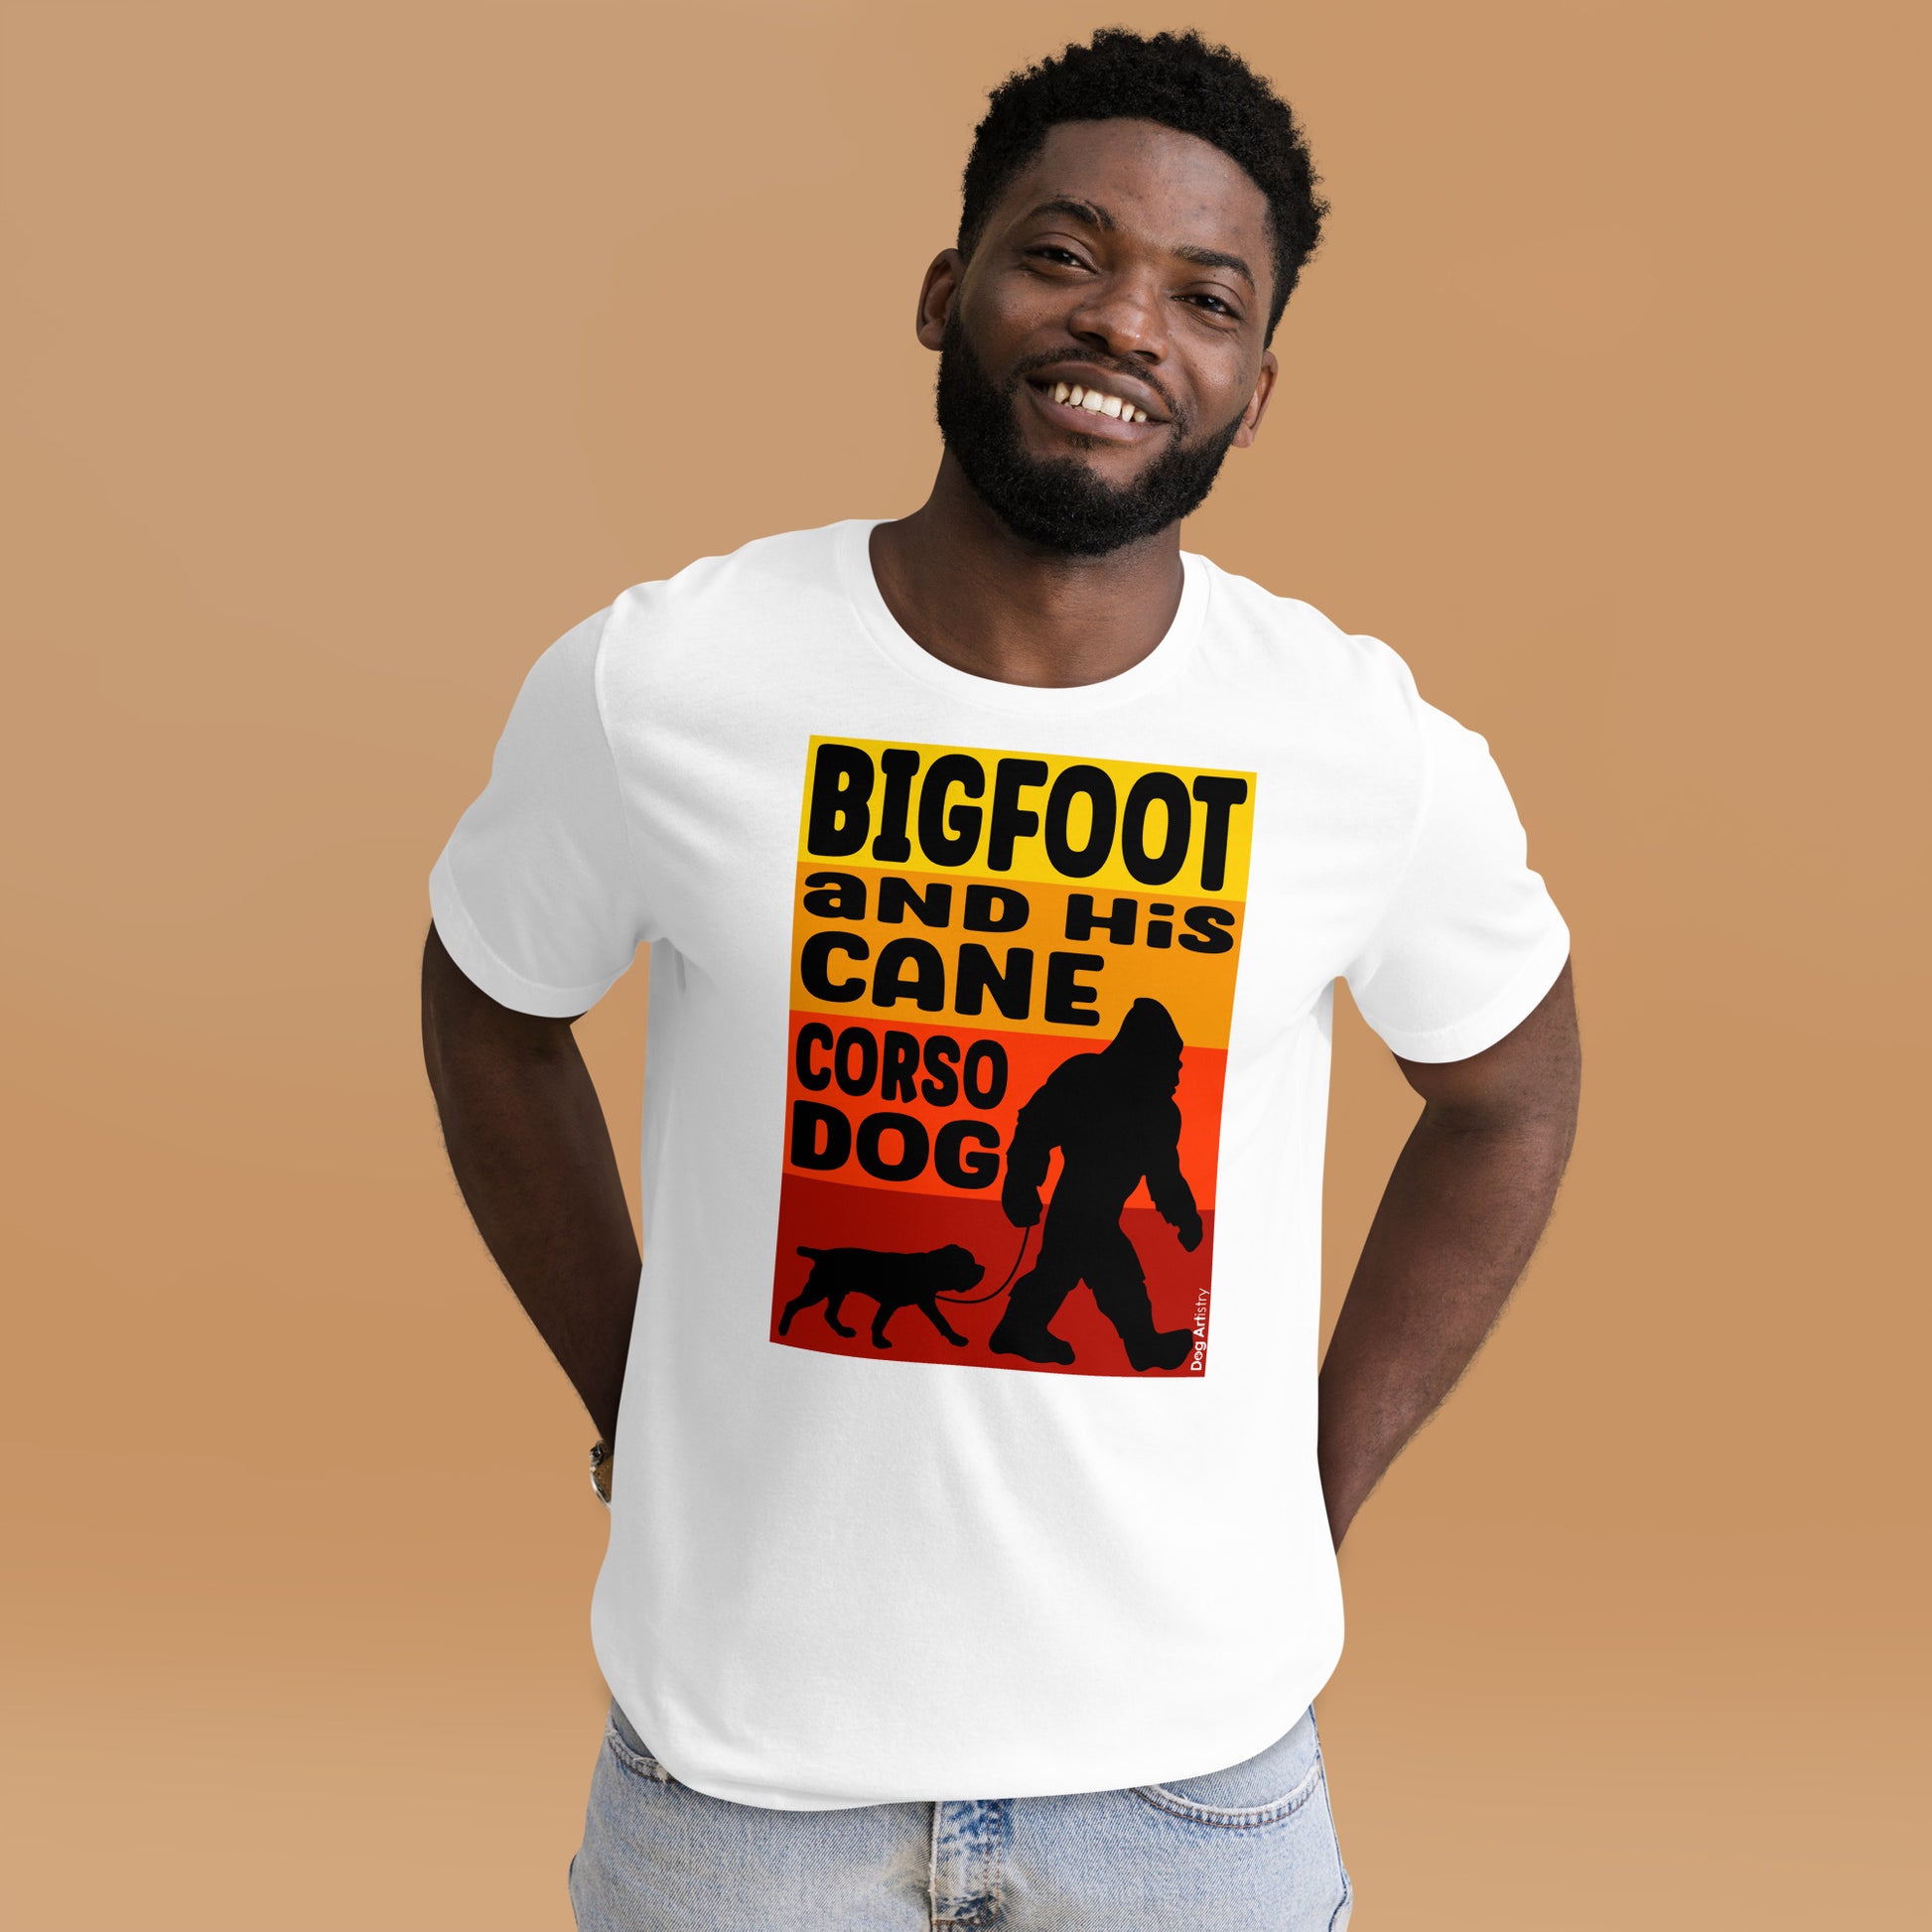 Big foot and his Cane Corso unisex white t-shirt by Dog Artistry.Big foot and his Cane Corso dog unisex white t-shirt by Dog Artistry.